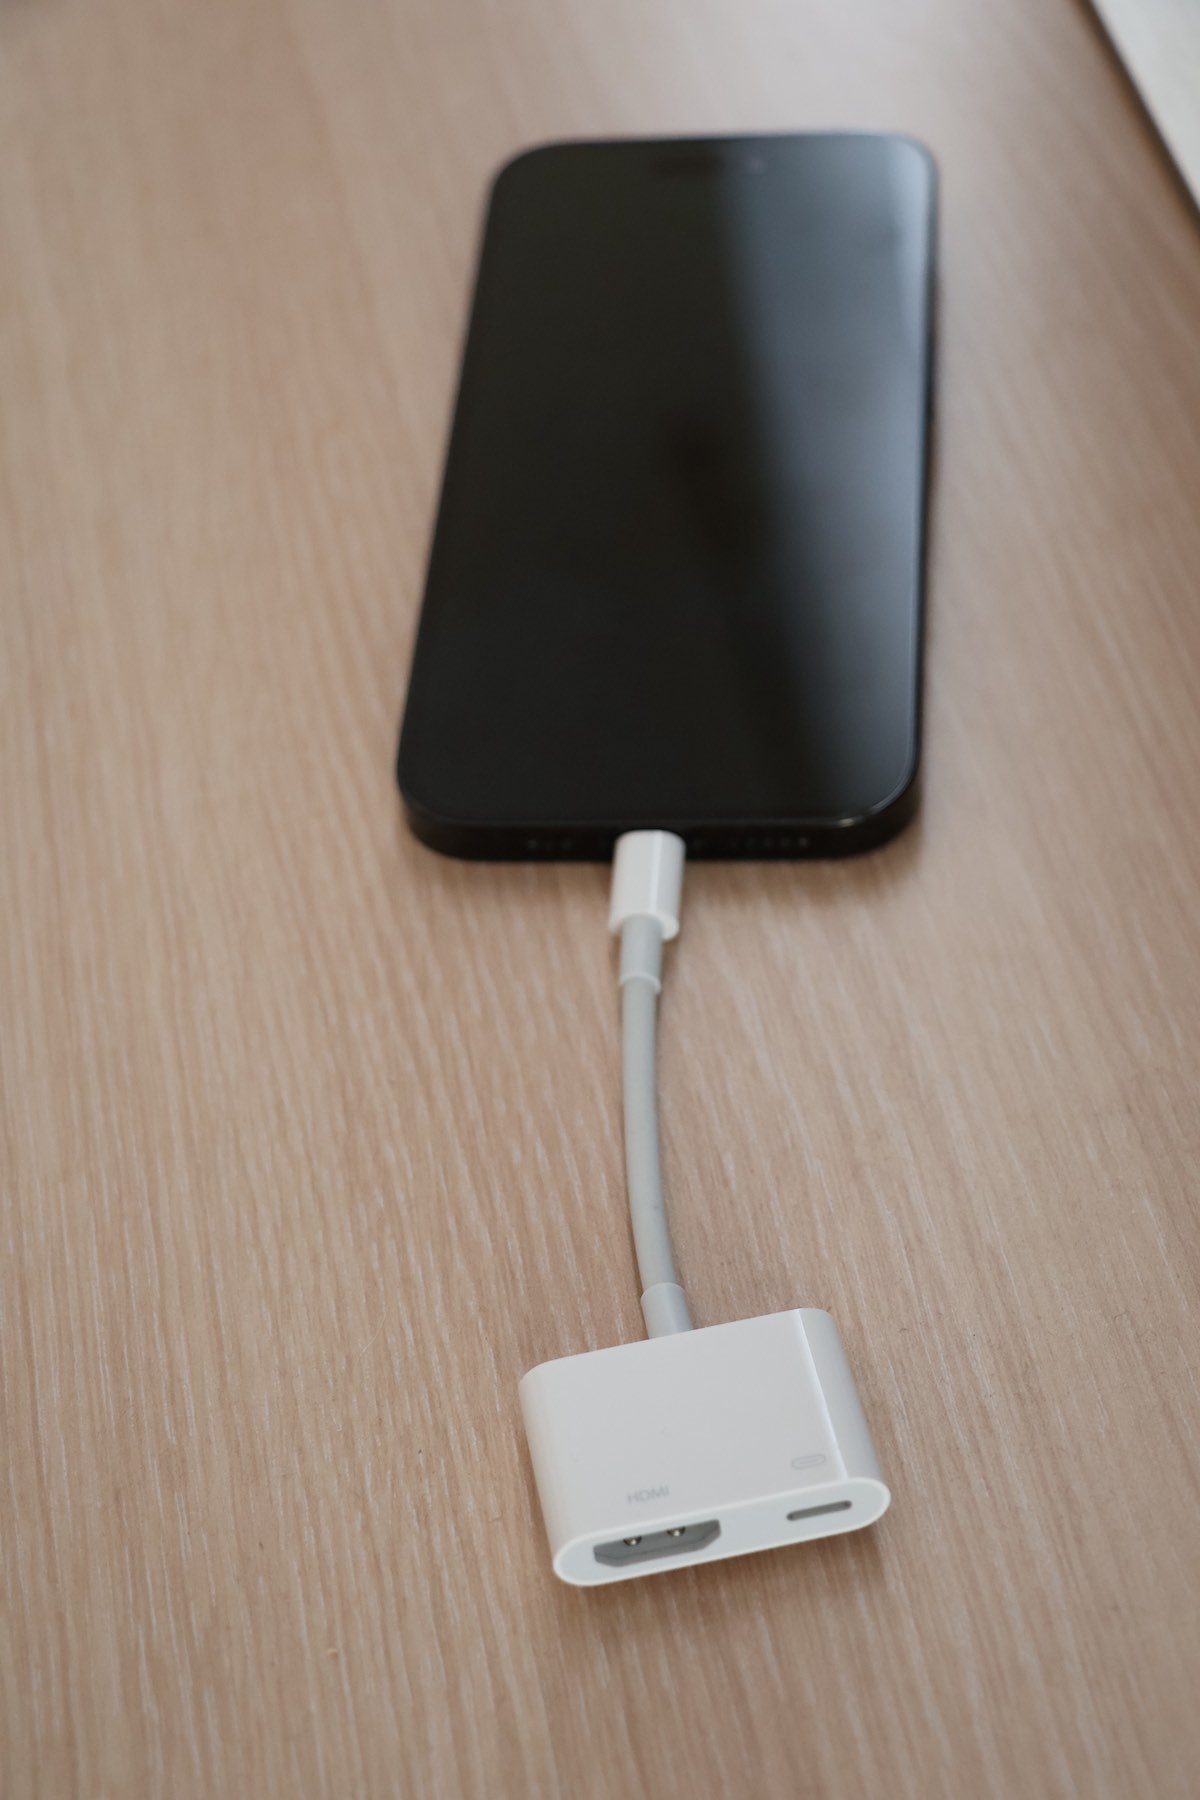 Connect the adapter to your iPhone